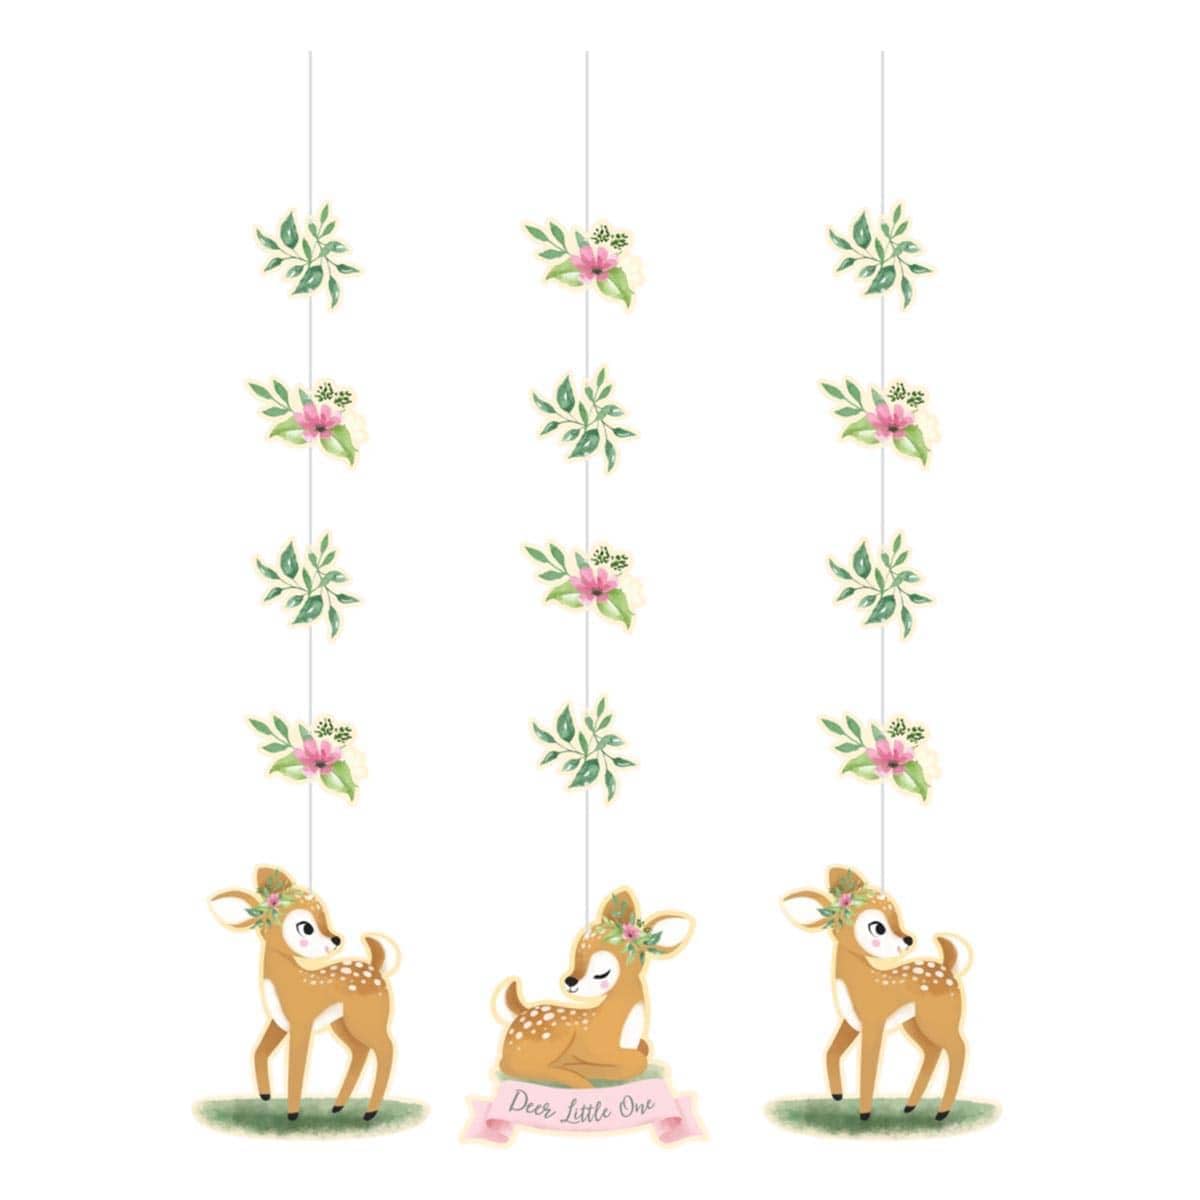 Buy 1st Birthday Deer Little One String Decoration, 3 Count sold at Party Expert